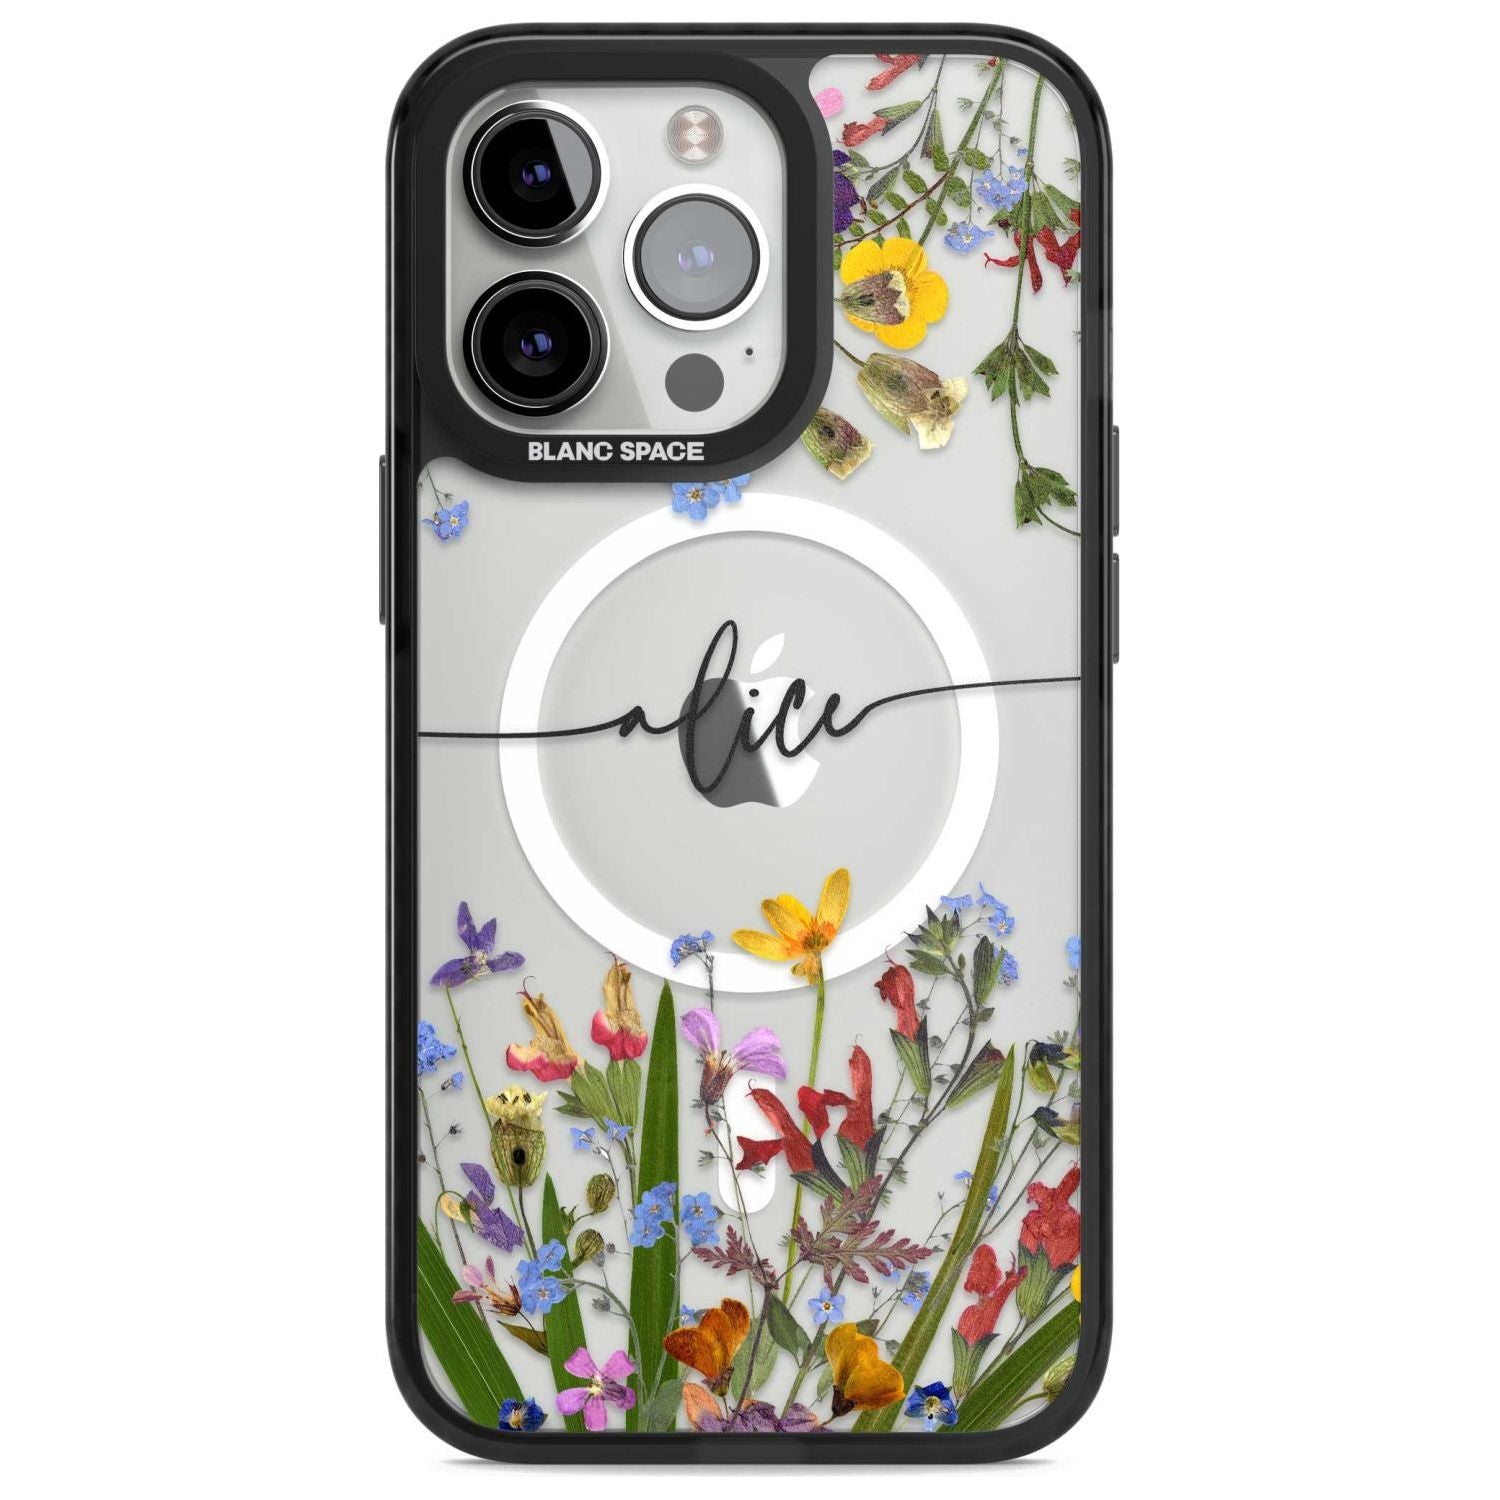 Personalised Wildflower Floral Custom Phone Case iPhone 15 Pro Max / Magsafe Black Impact Case,iPhone 15 Pro / Magsafe Black Impact Case,iPhone 14 Pro Max / Magsafe Black Impact Case,iPhone 14 Pro / Magsafe Black Impact Case,iPhone 13 Pro / Magsafe Black Impact Case Blanc Space